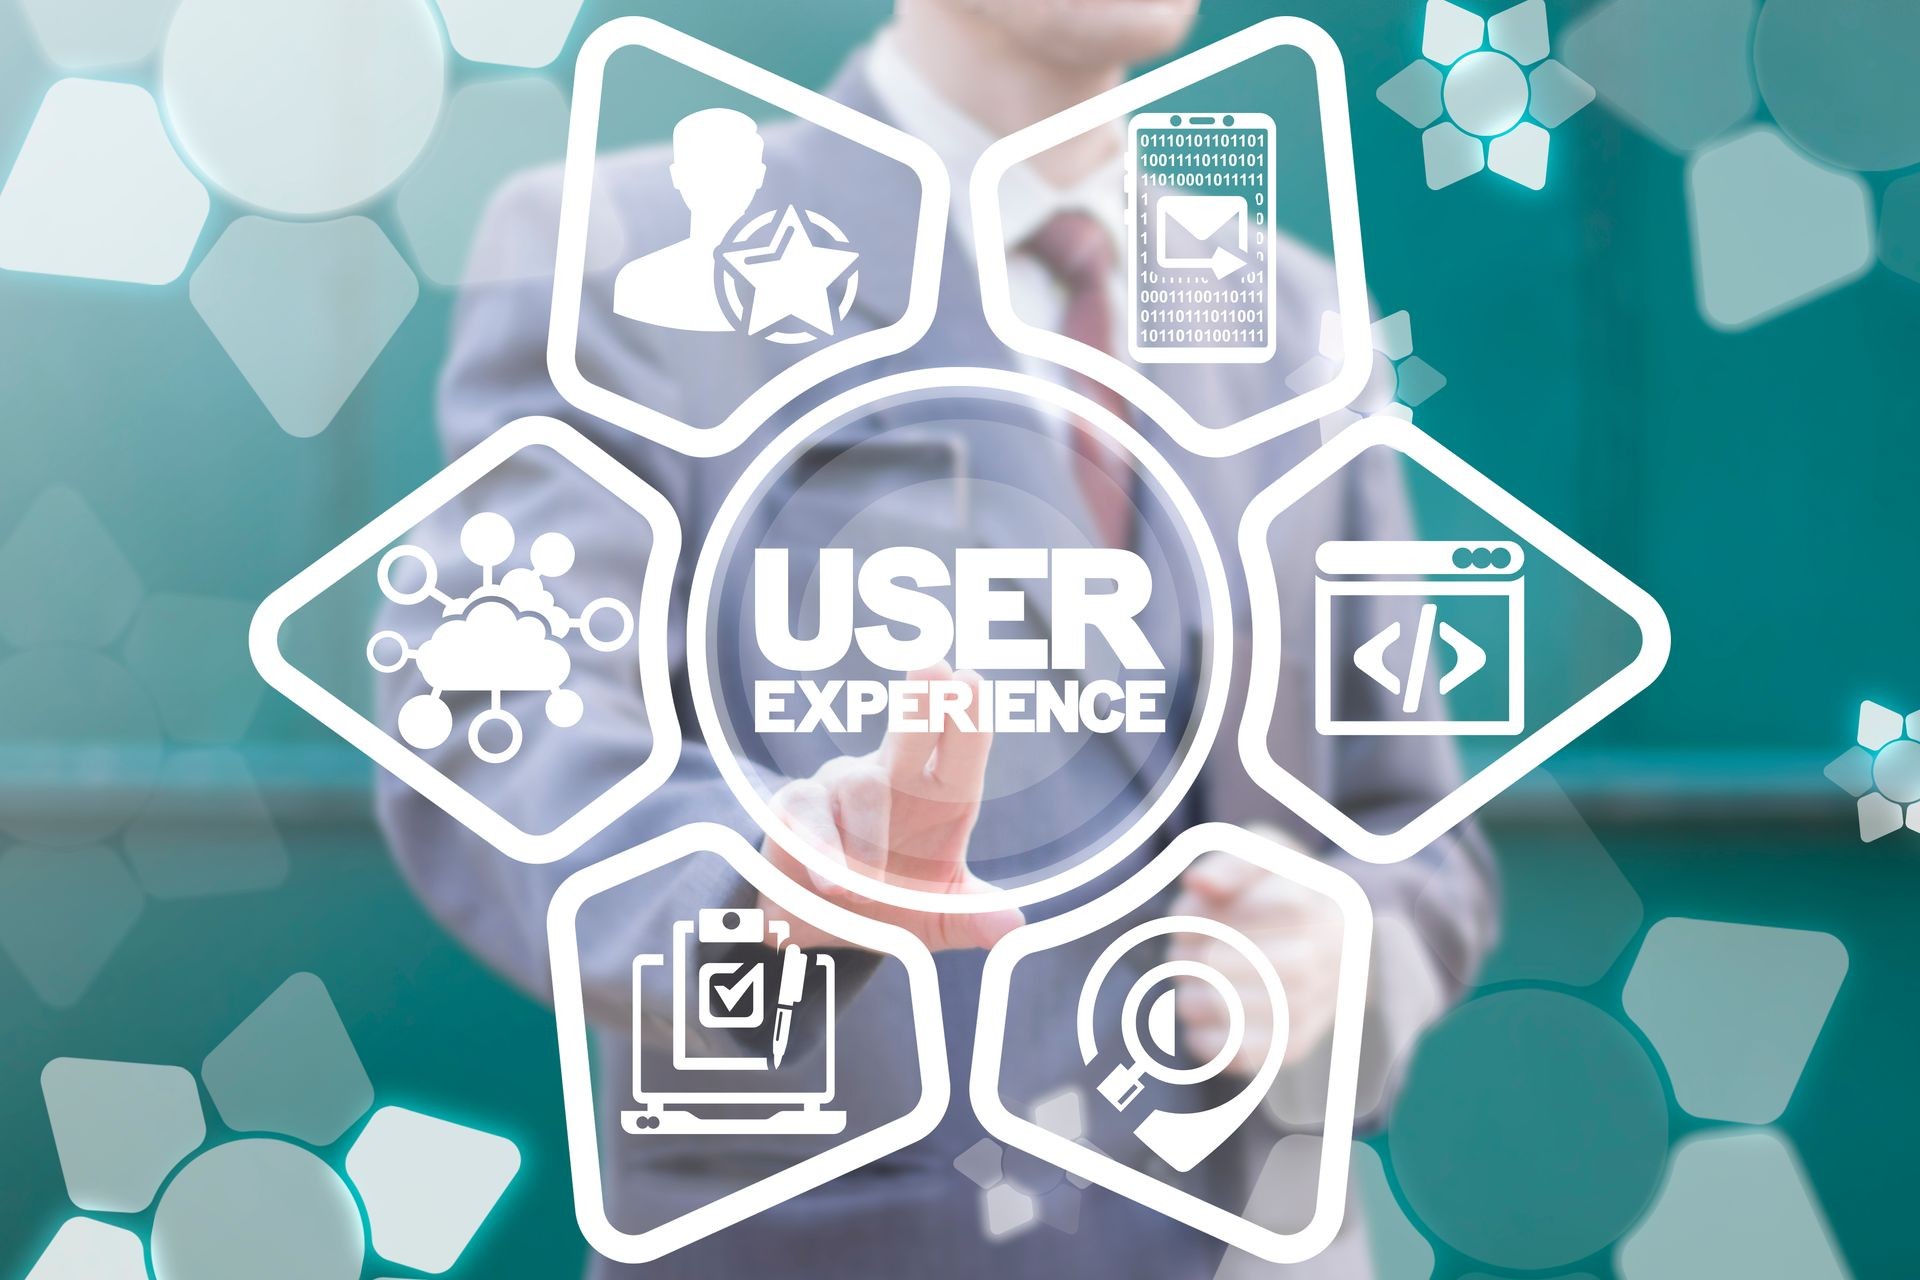 UX -User Experience Usability Friendly Virtual Interface Information Technology.